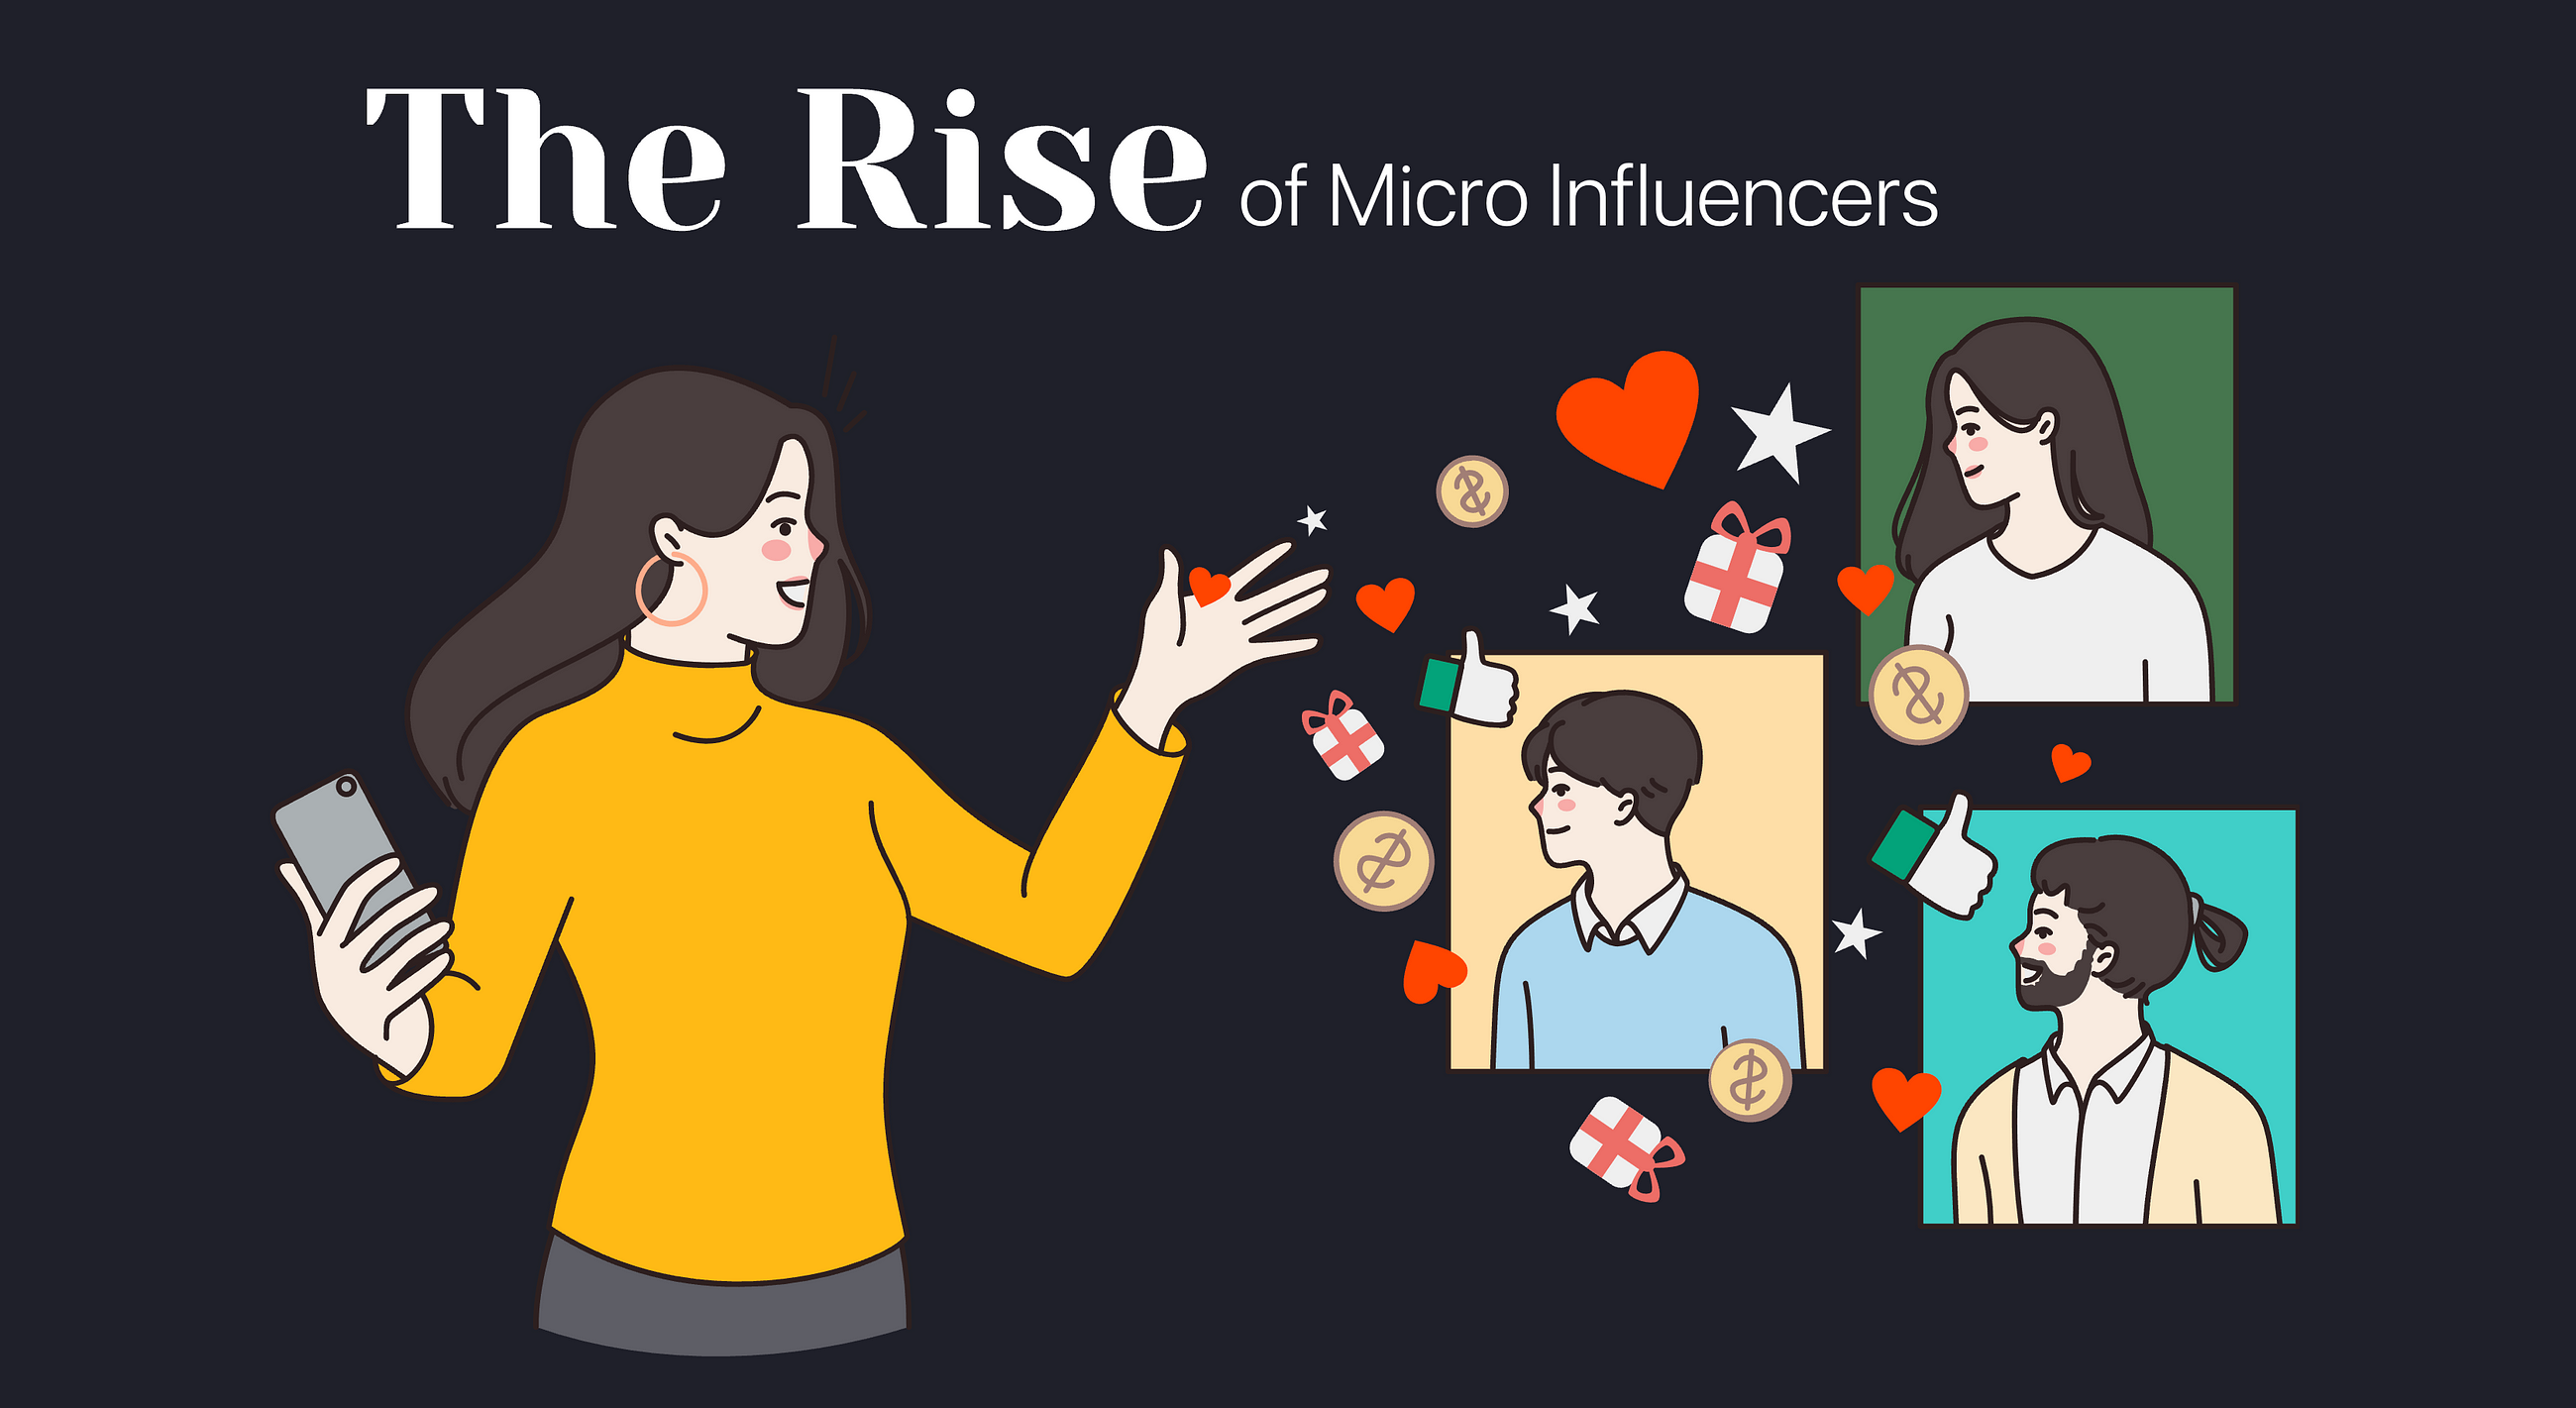 Why the Micro-Influencer Rise?